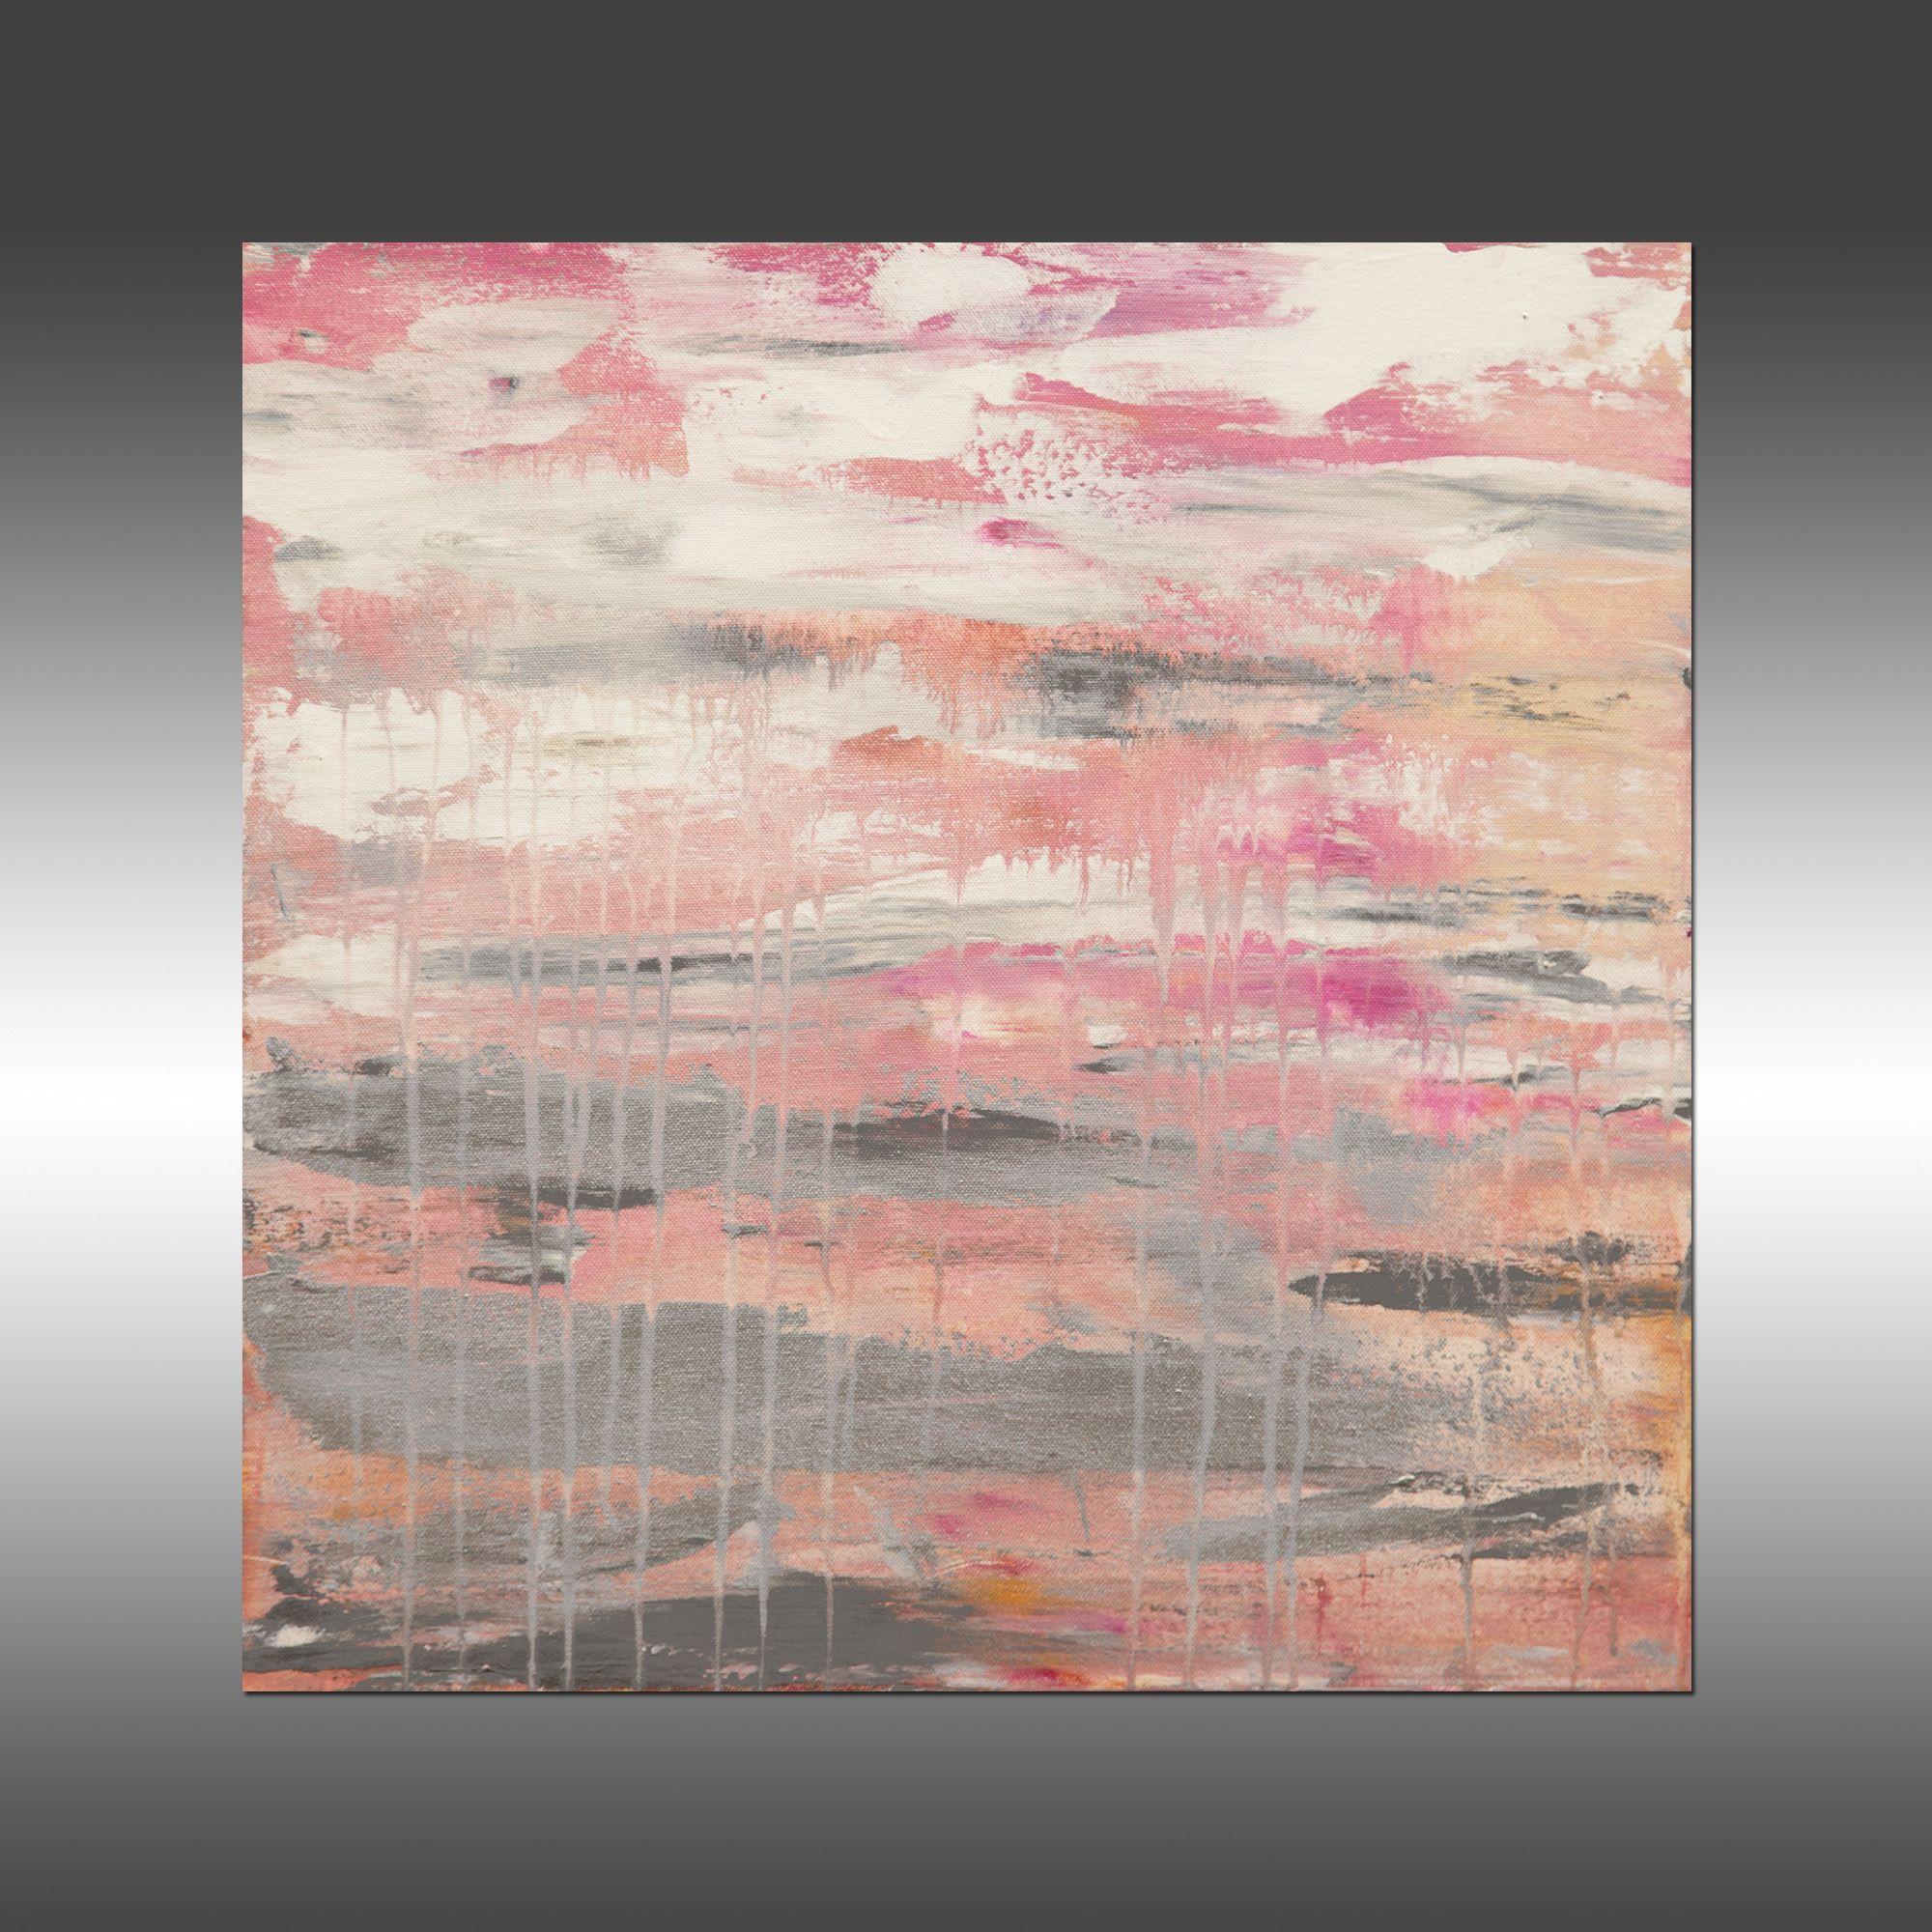 Lithosphere 178 is an original painting, created with acrylic paint on gallery-wrapped canvas. It has a width of 20 inches and a height of 20 inches with a depth of 1 inch (20x20x1).     The colors used in the painting are pink, white, gray, and